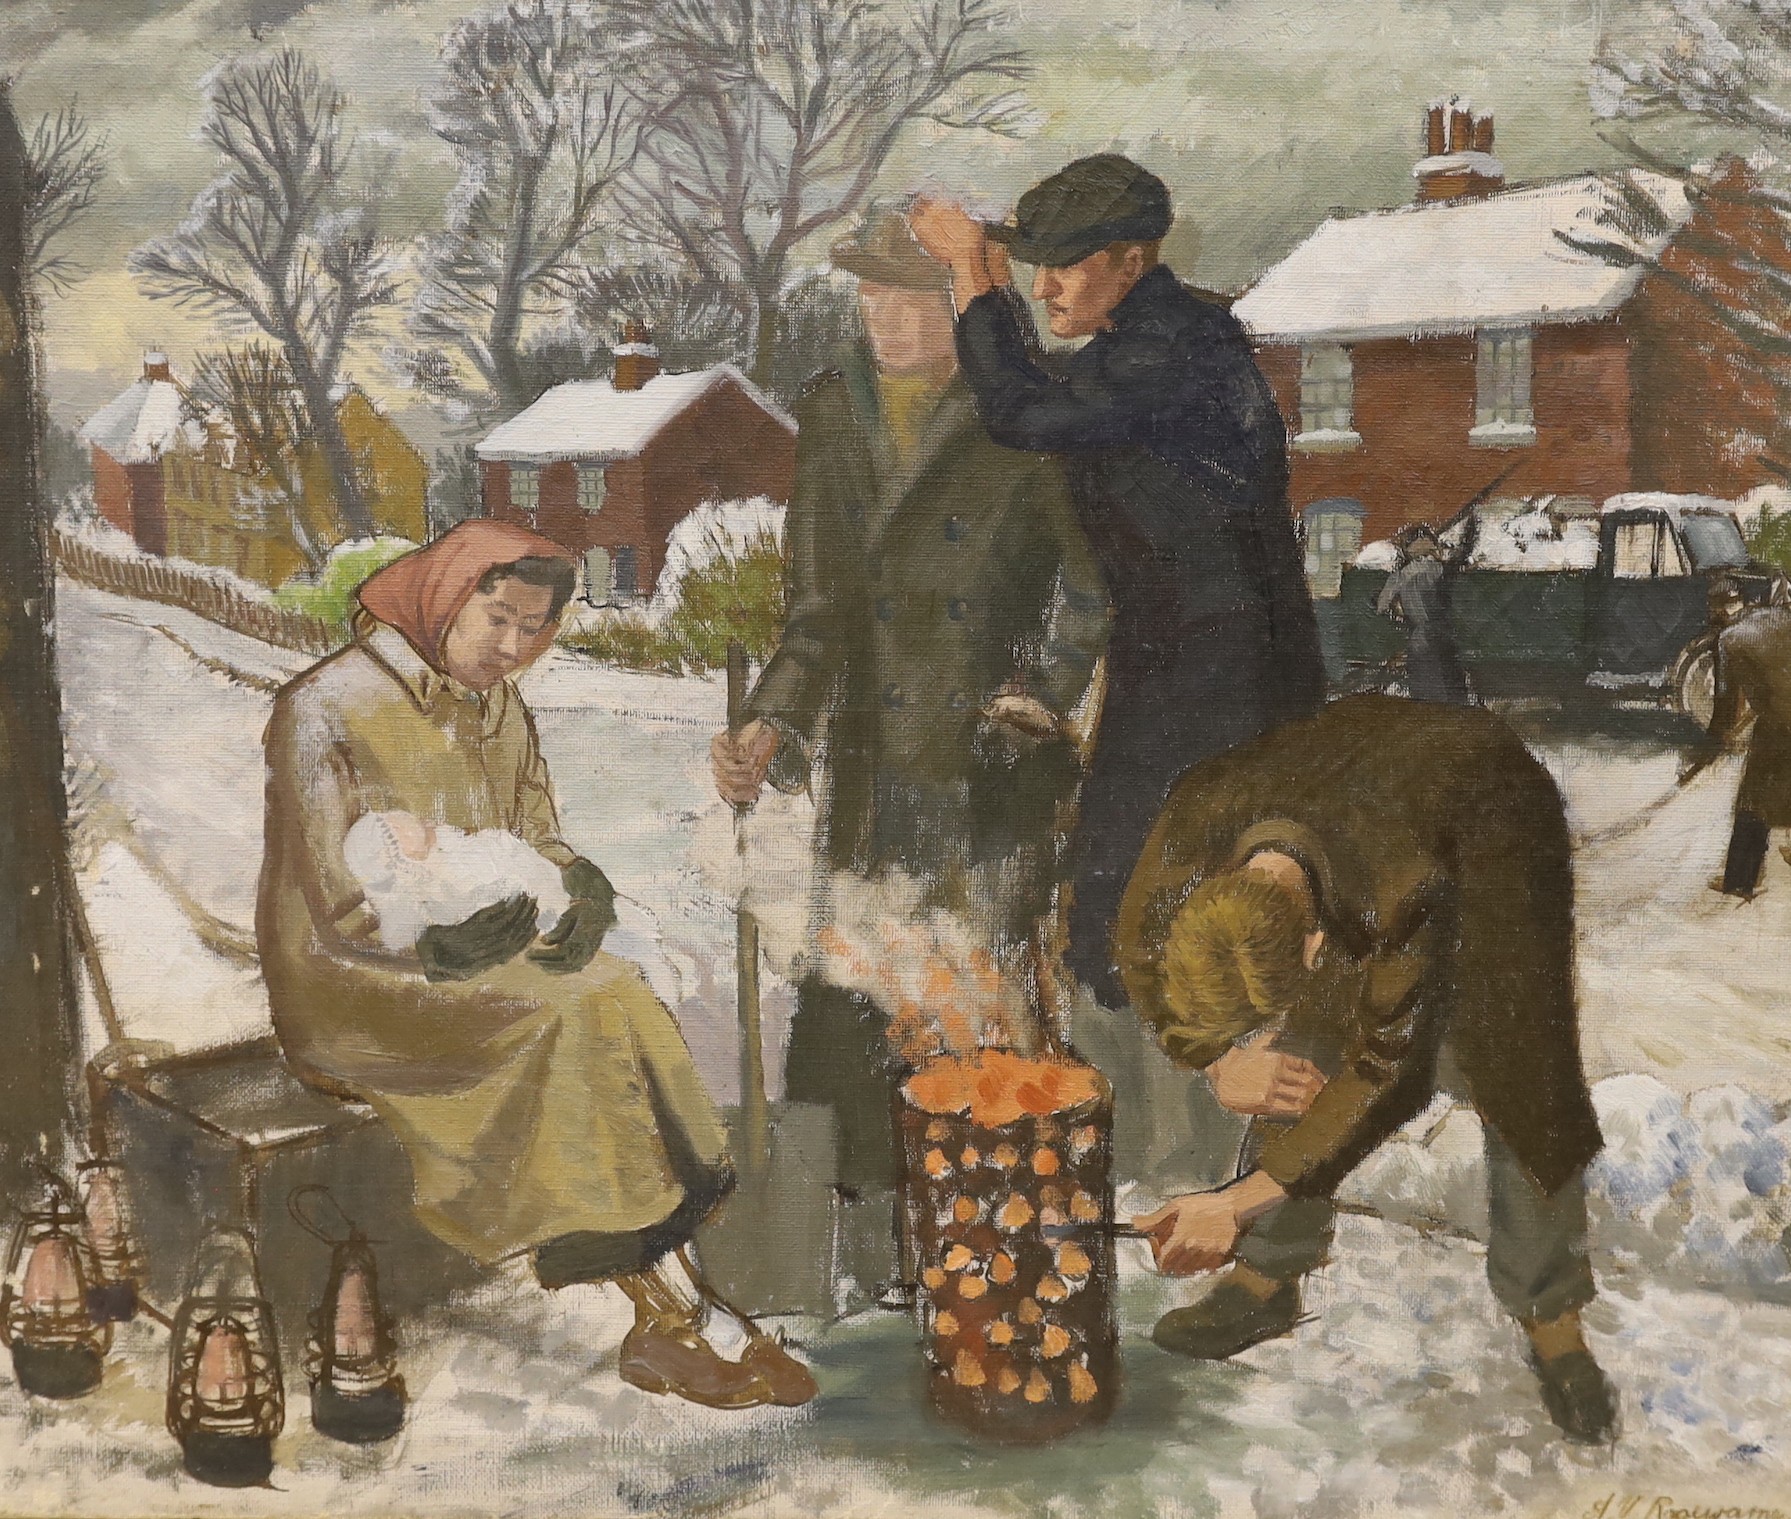 Beatrice Ivy Rosewarne, oil on canvas, Itinerants in the street around a brazier, signed, 51 x 61cm, unframed